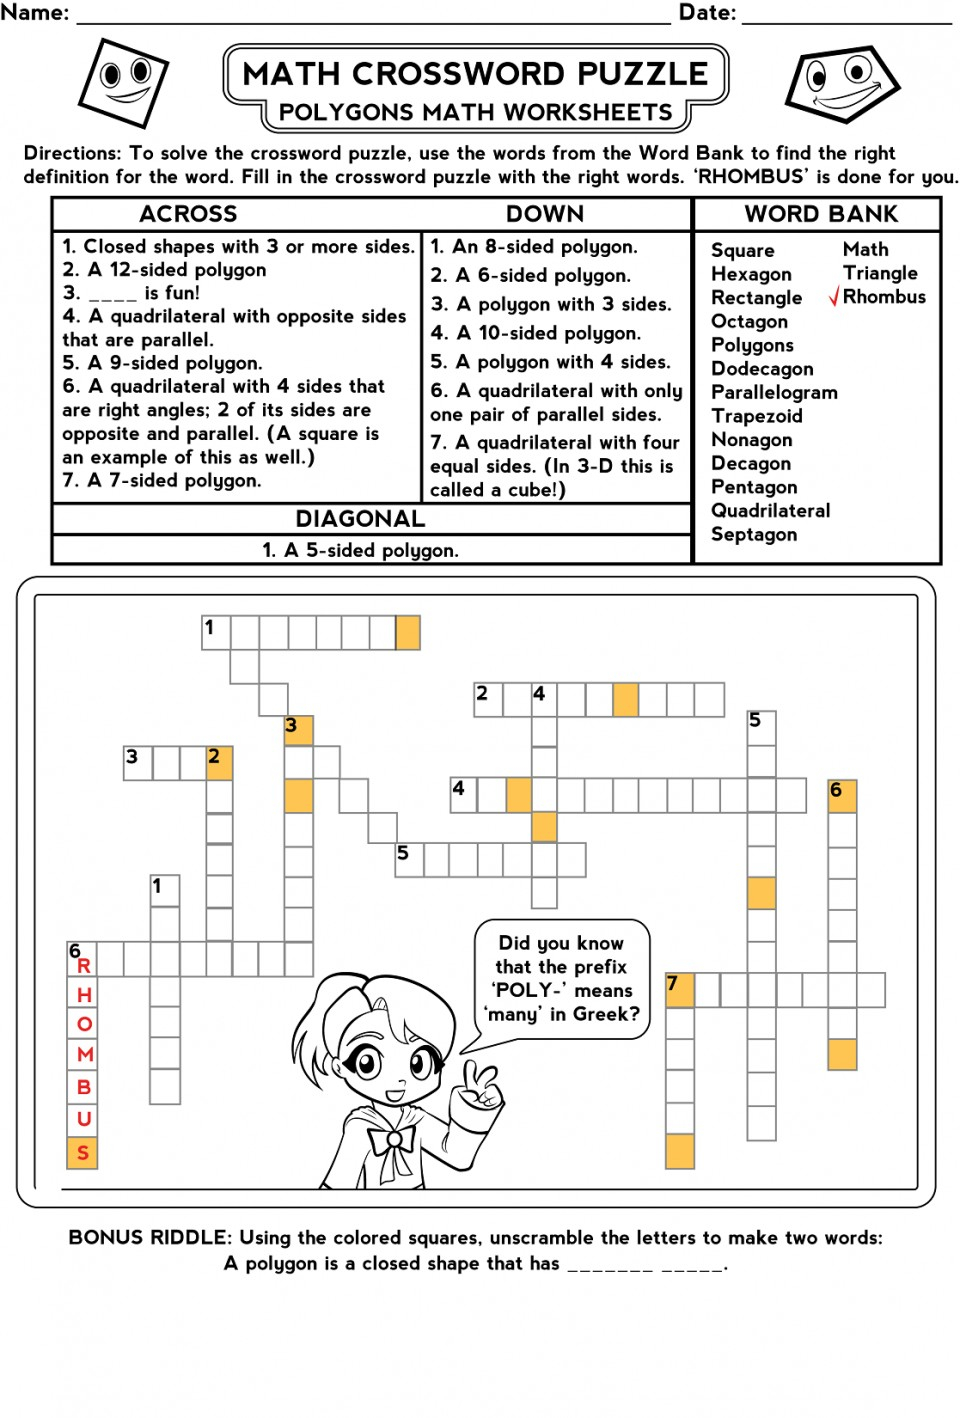 Free Printable Math Puzzles Number Crosswords Make Puzzle Worksheet - Printable Math Crossword Puzzles For High School